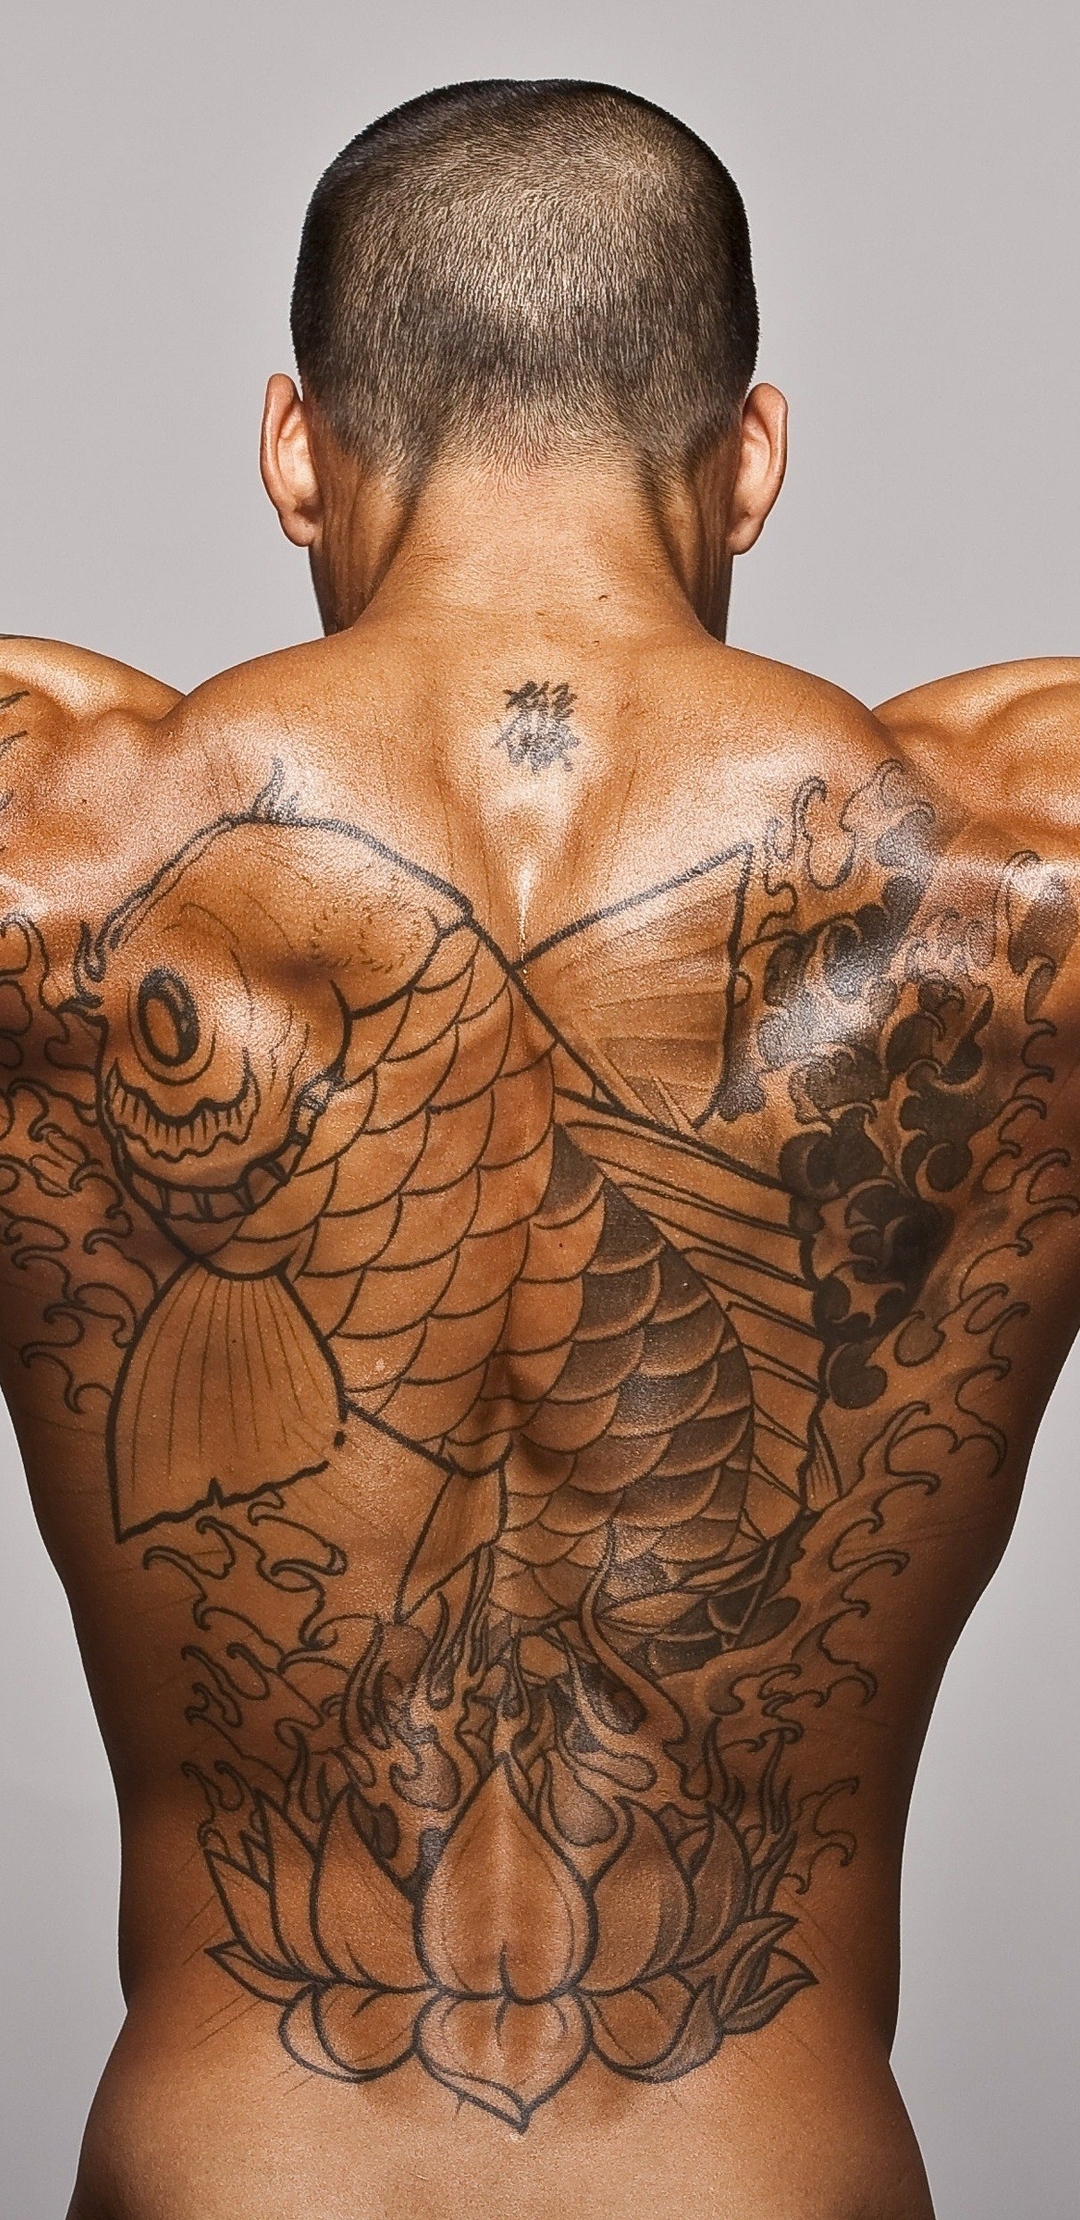 Image: Male, muscles, body, back, tattoo, Lotus, fish